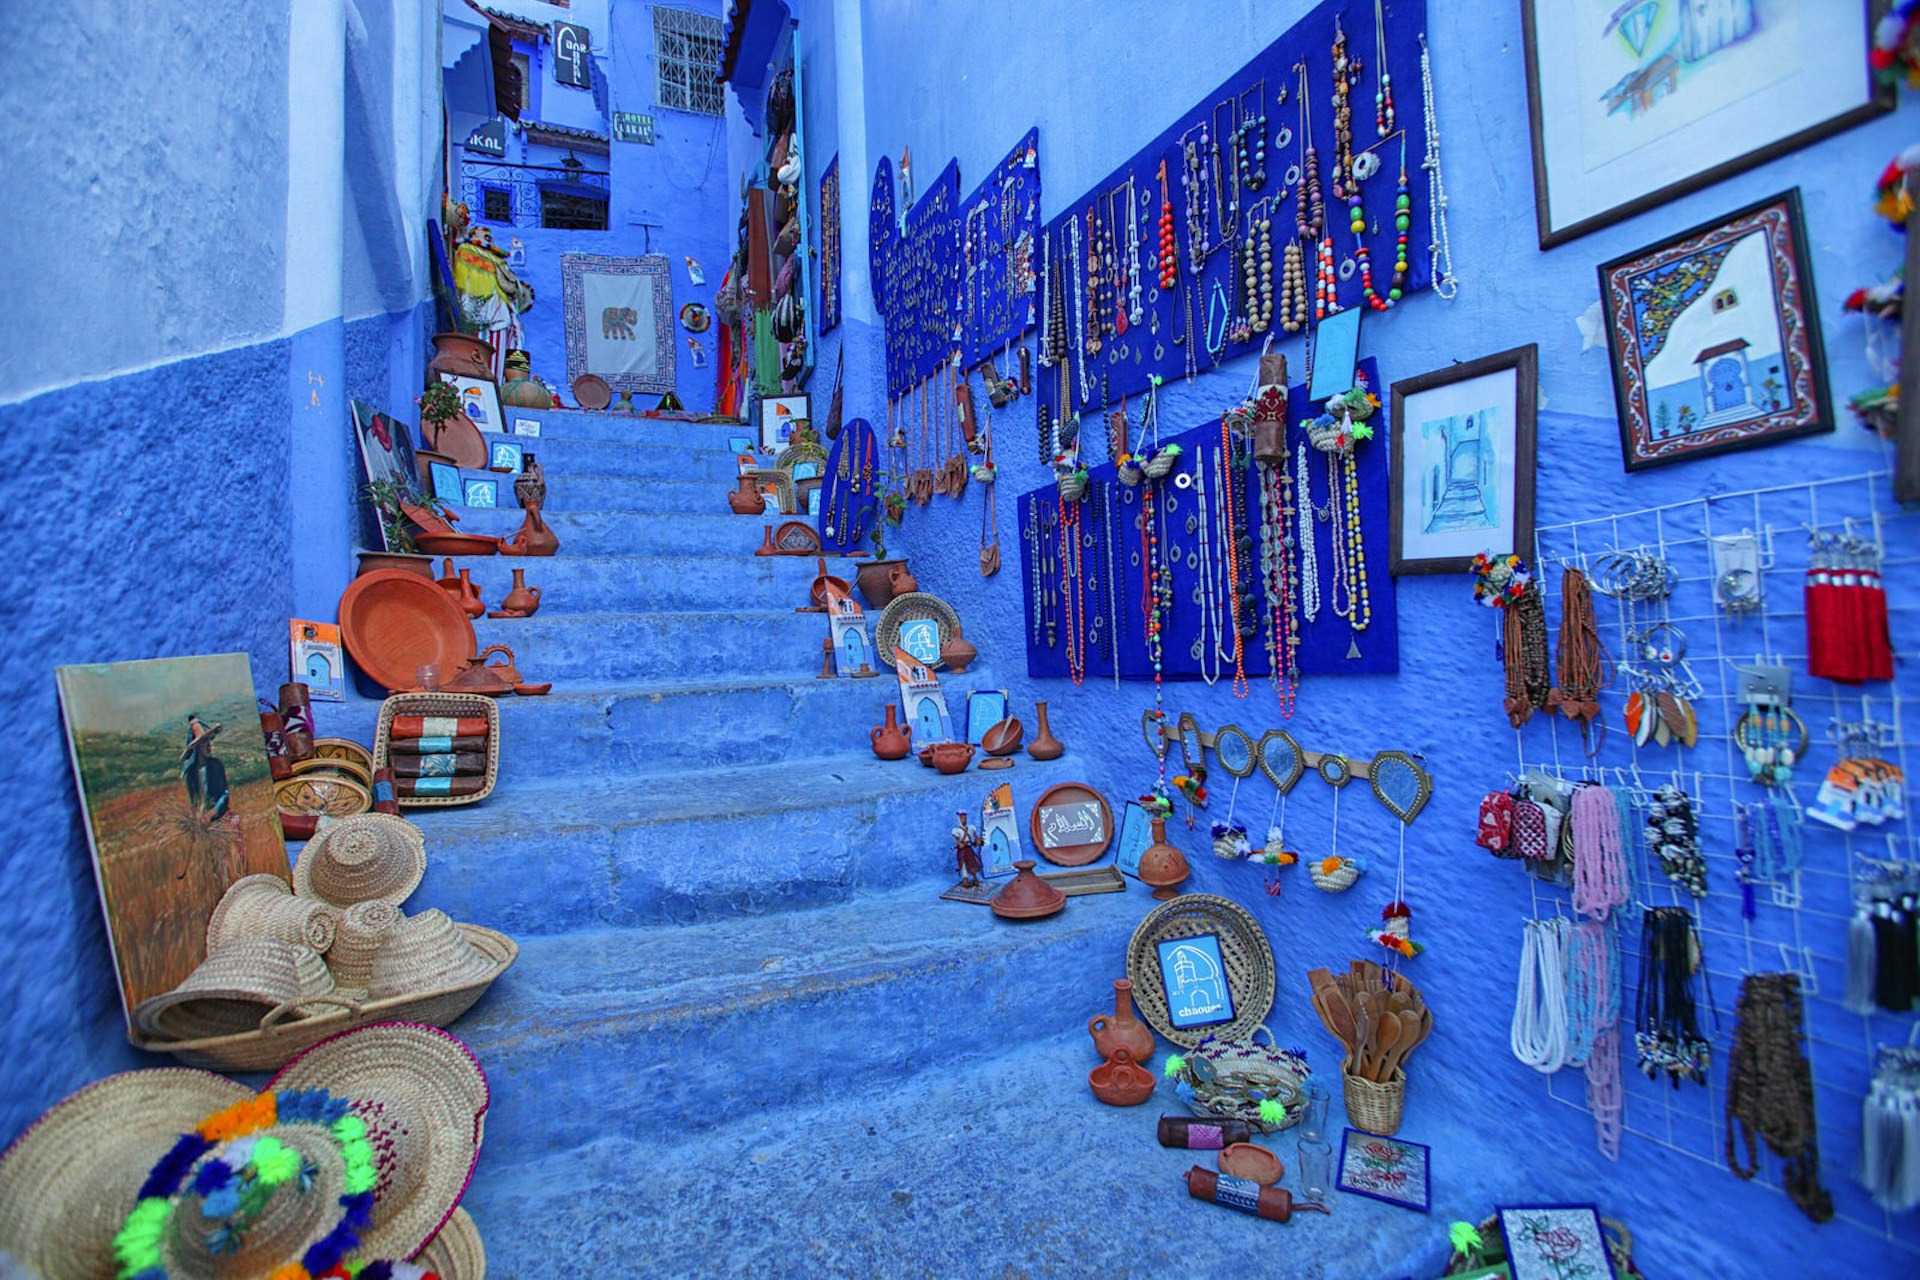 Jewellery and accessories for sale in an alley in Chefchaouen. Image by David Santiago Garcia / Getty Images